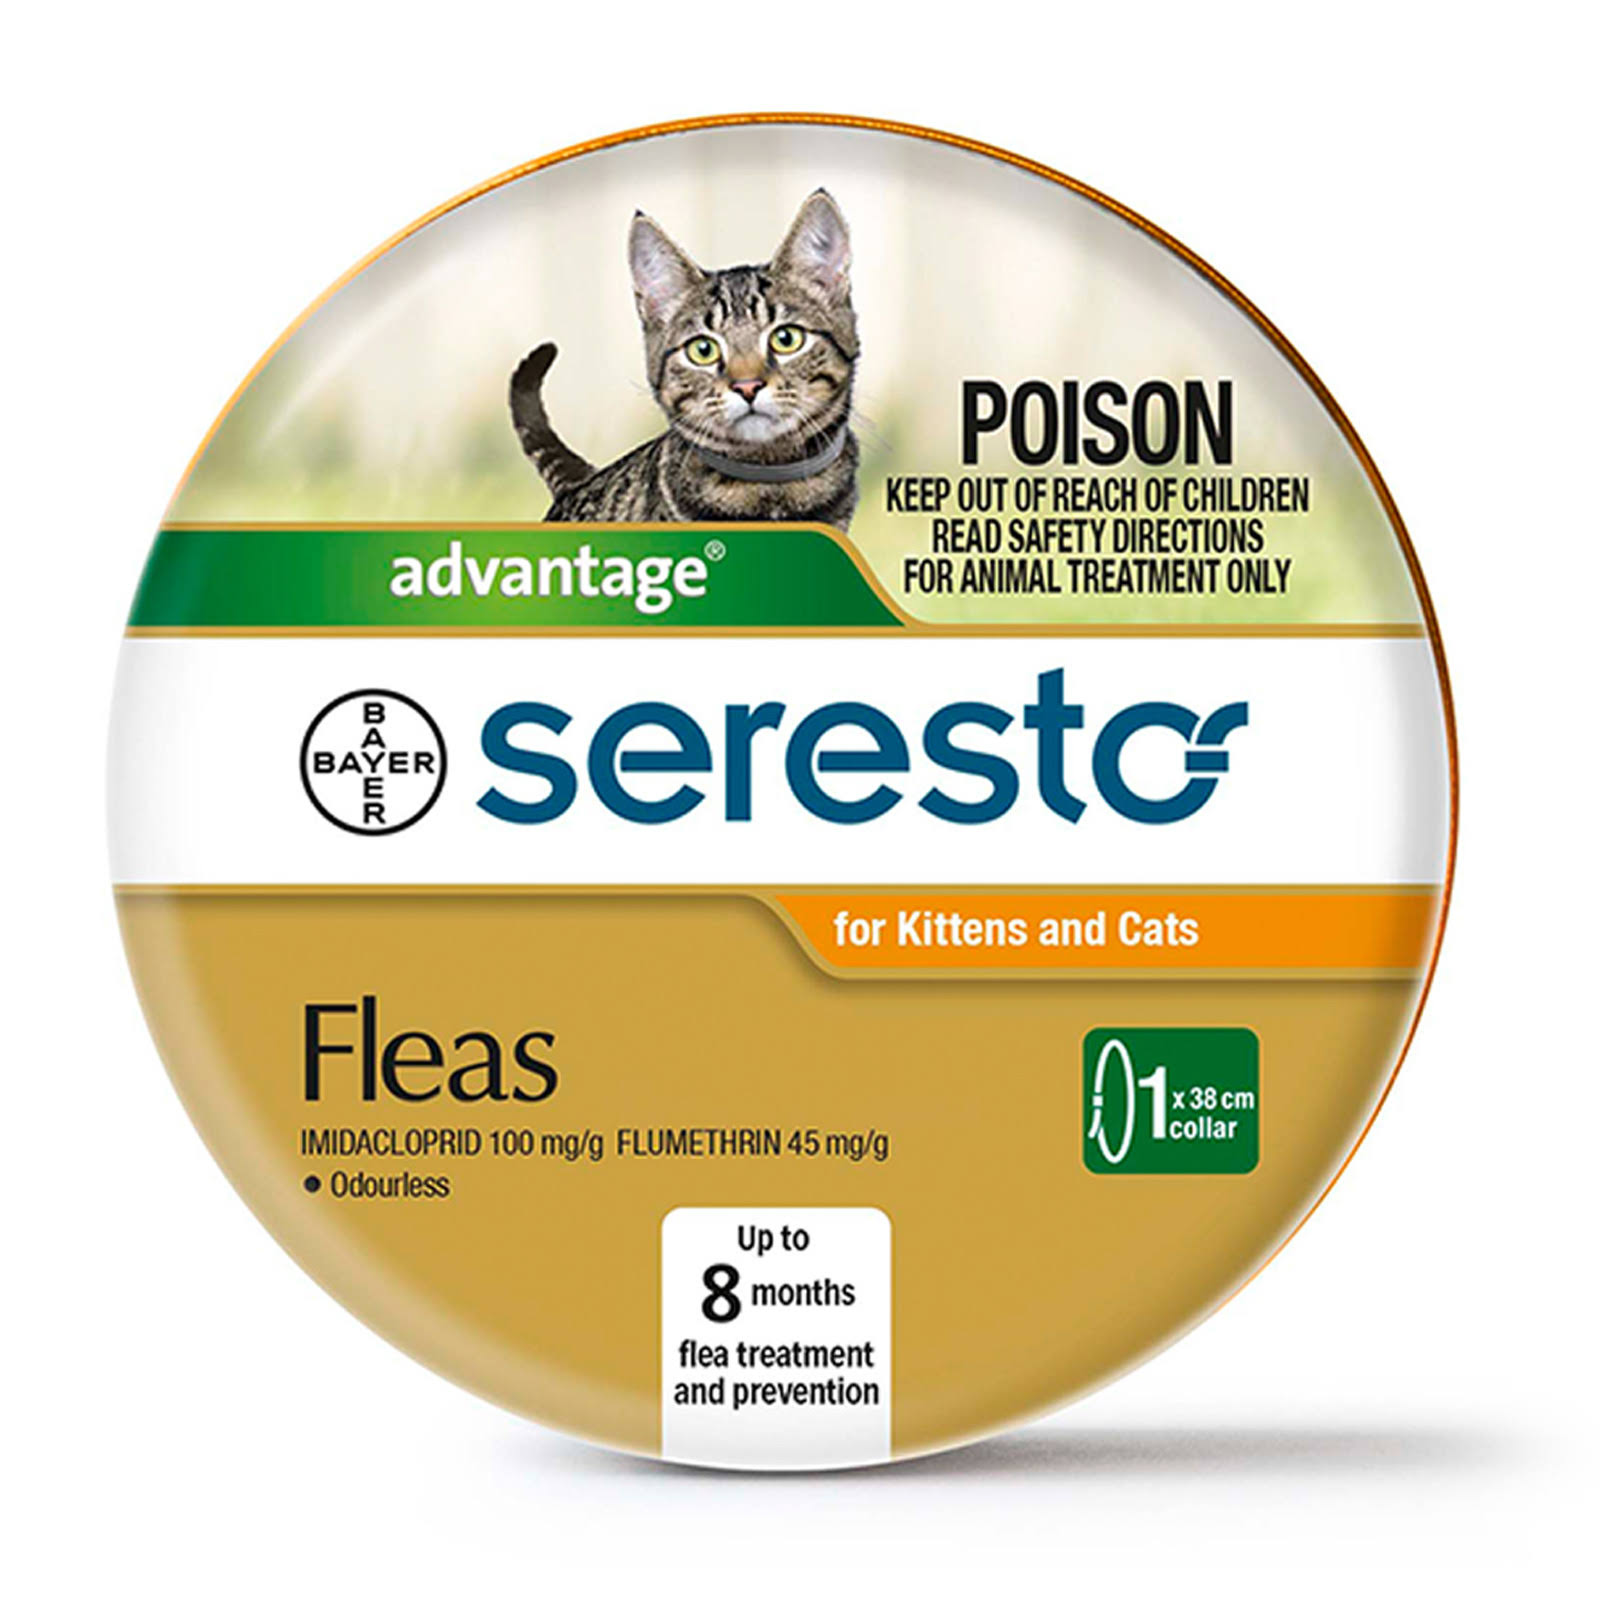 Bayer Seresto Flea and Tick Collar for Cats - 8 Months